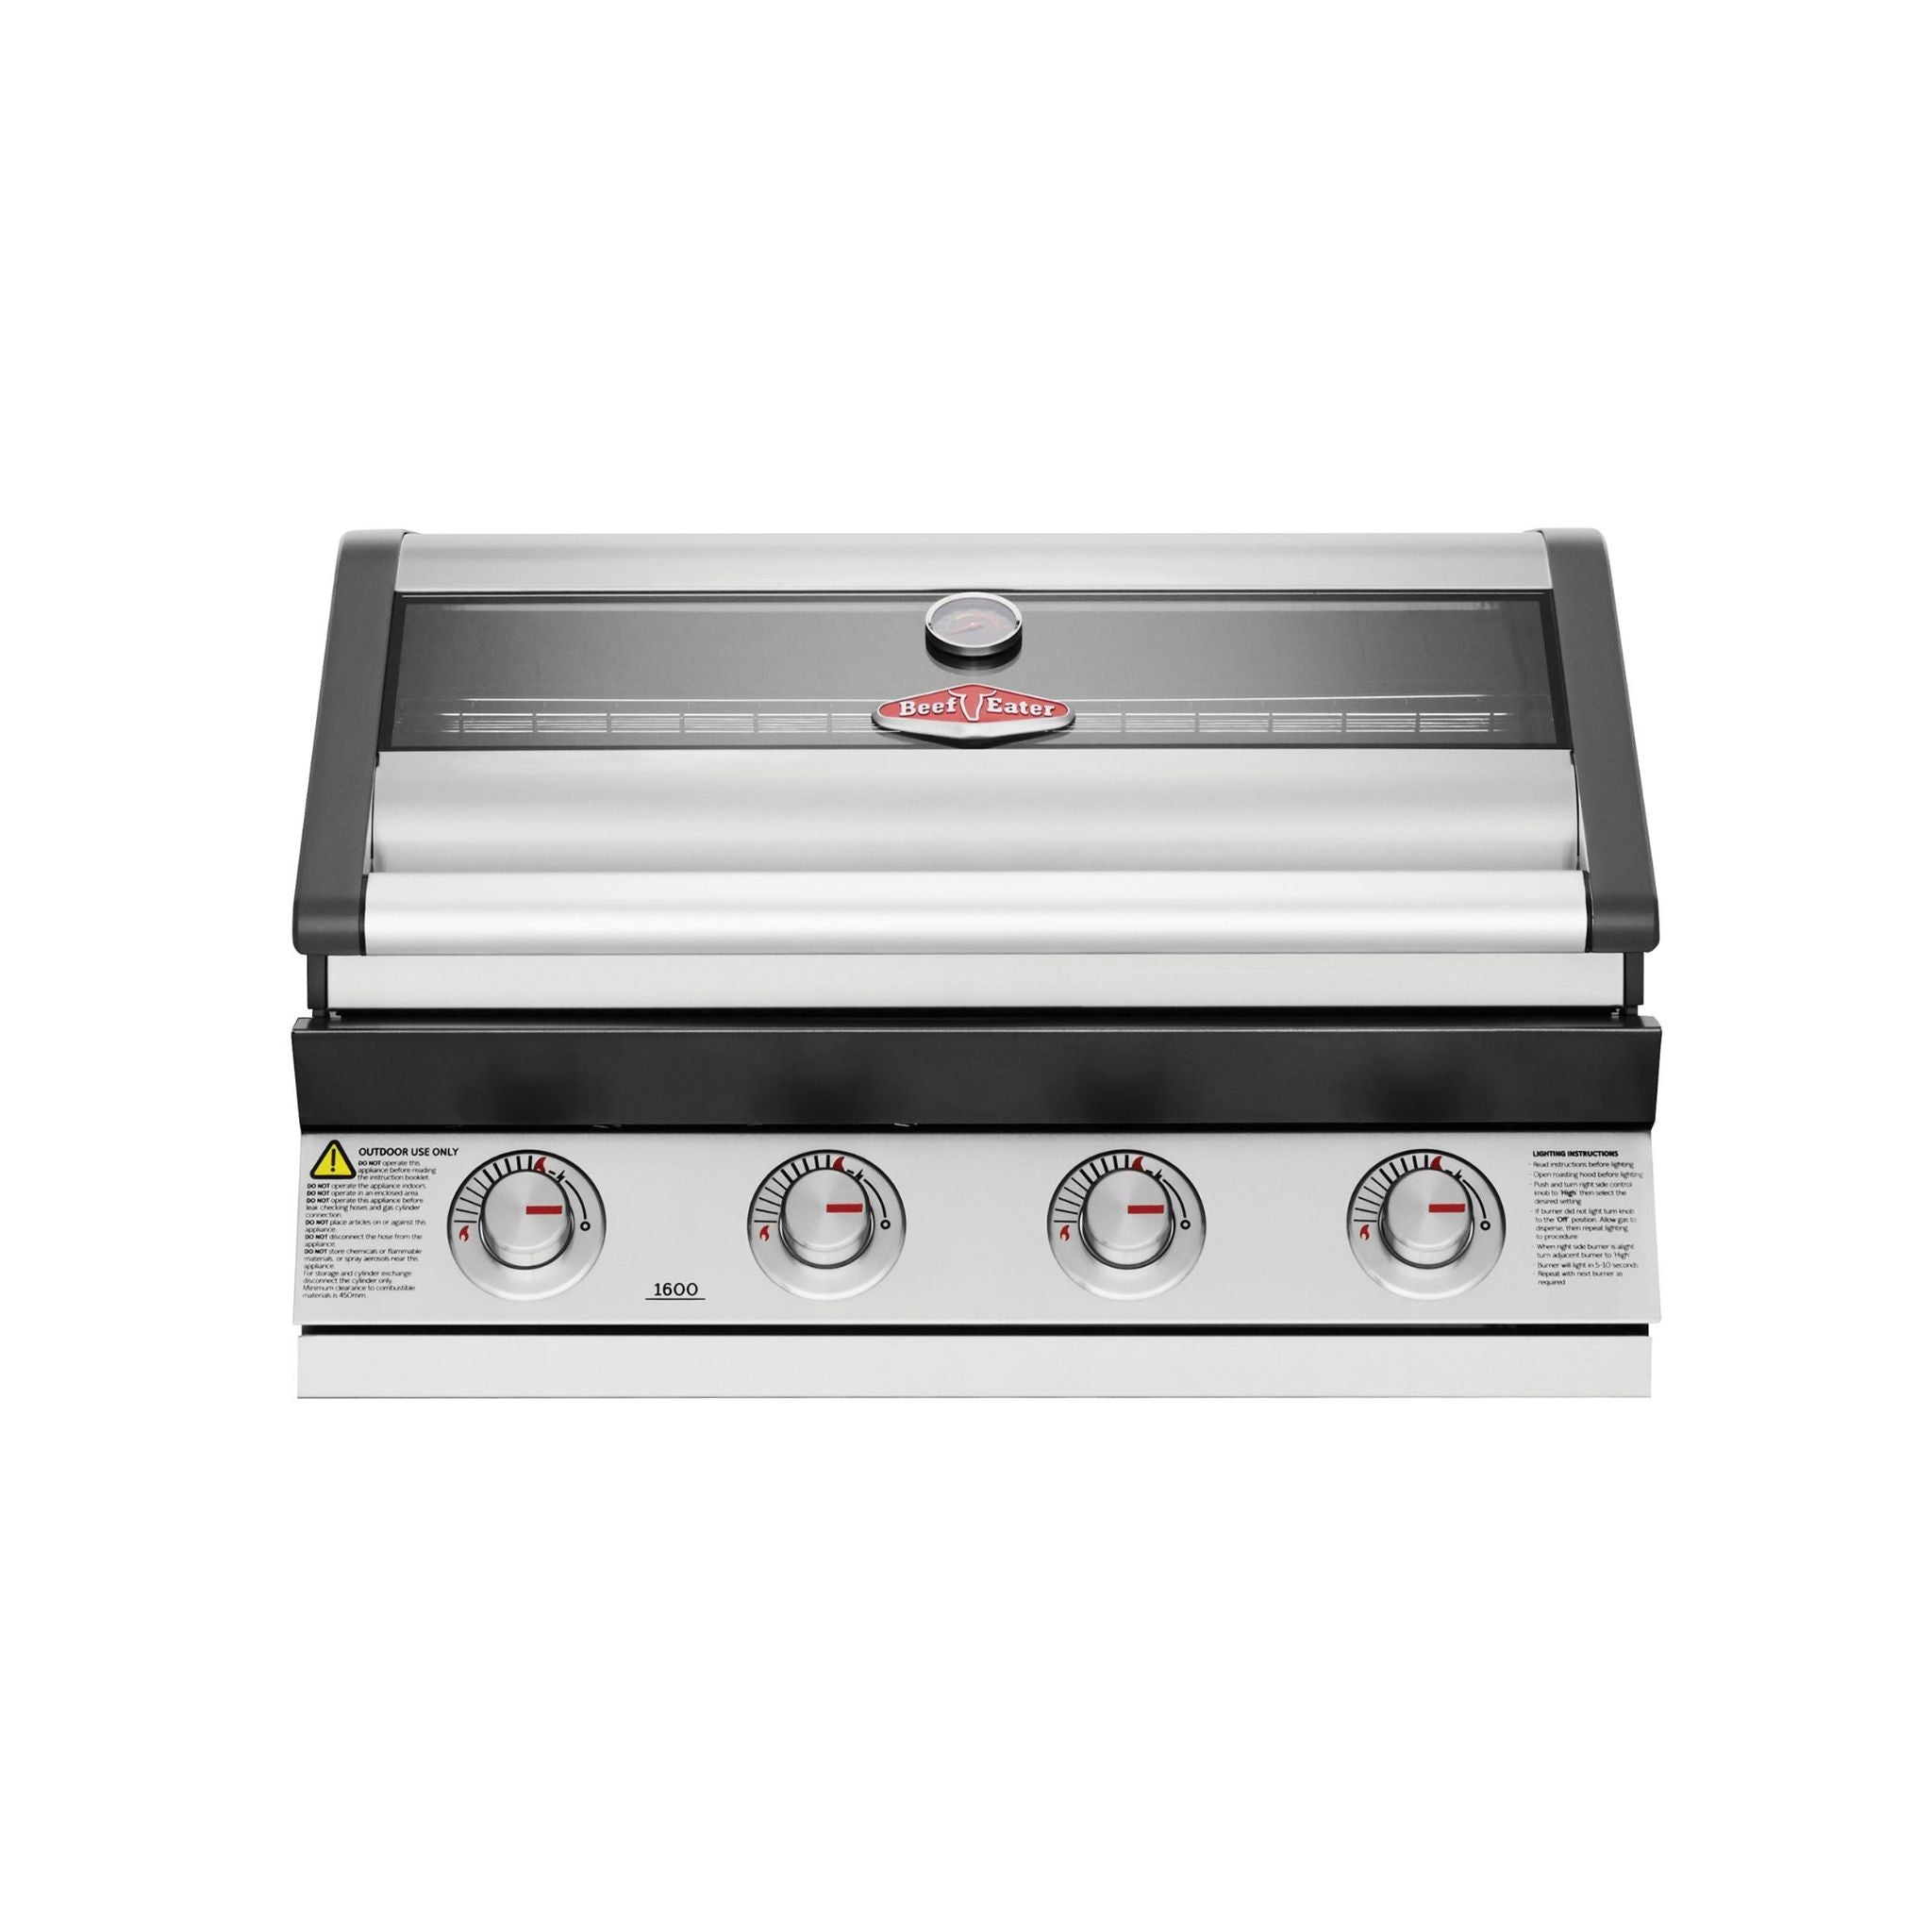 BeefEater Discovery 1600 Series - 4 Burner Built In Gas BBQ (Dark Grey Enamel or Stainless Steel)